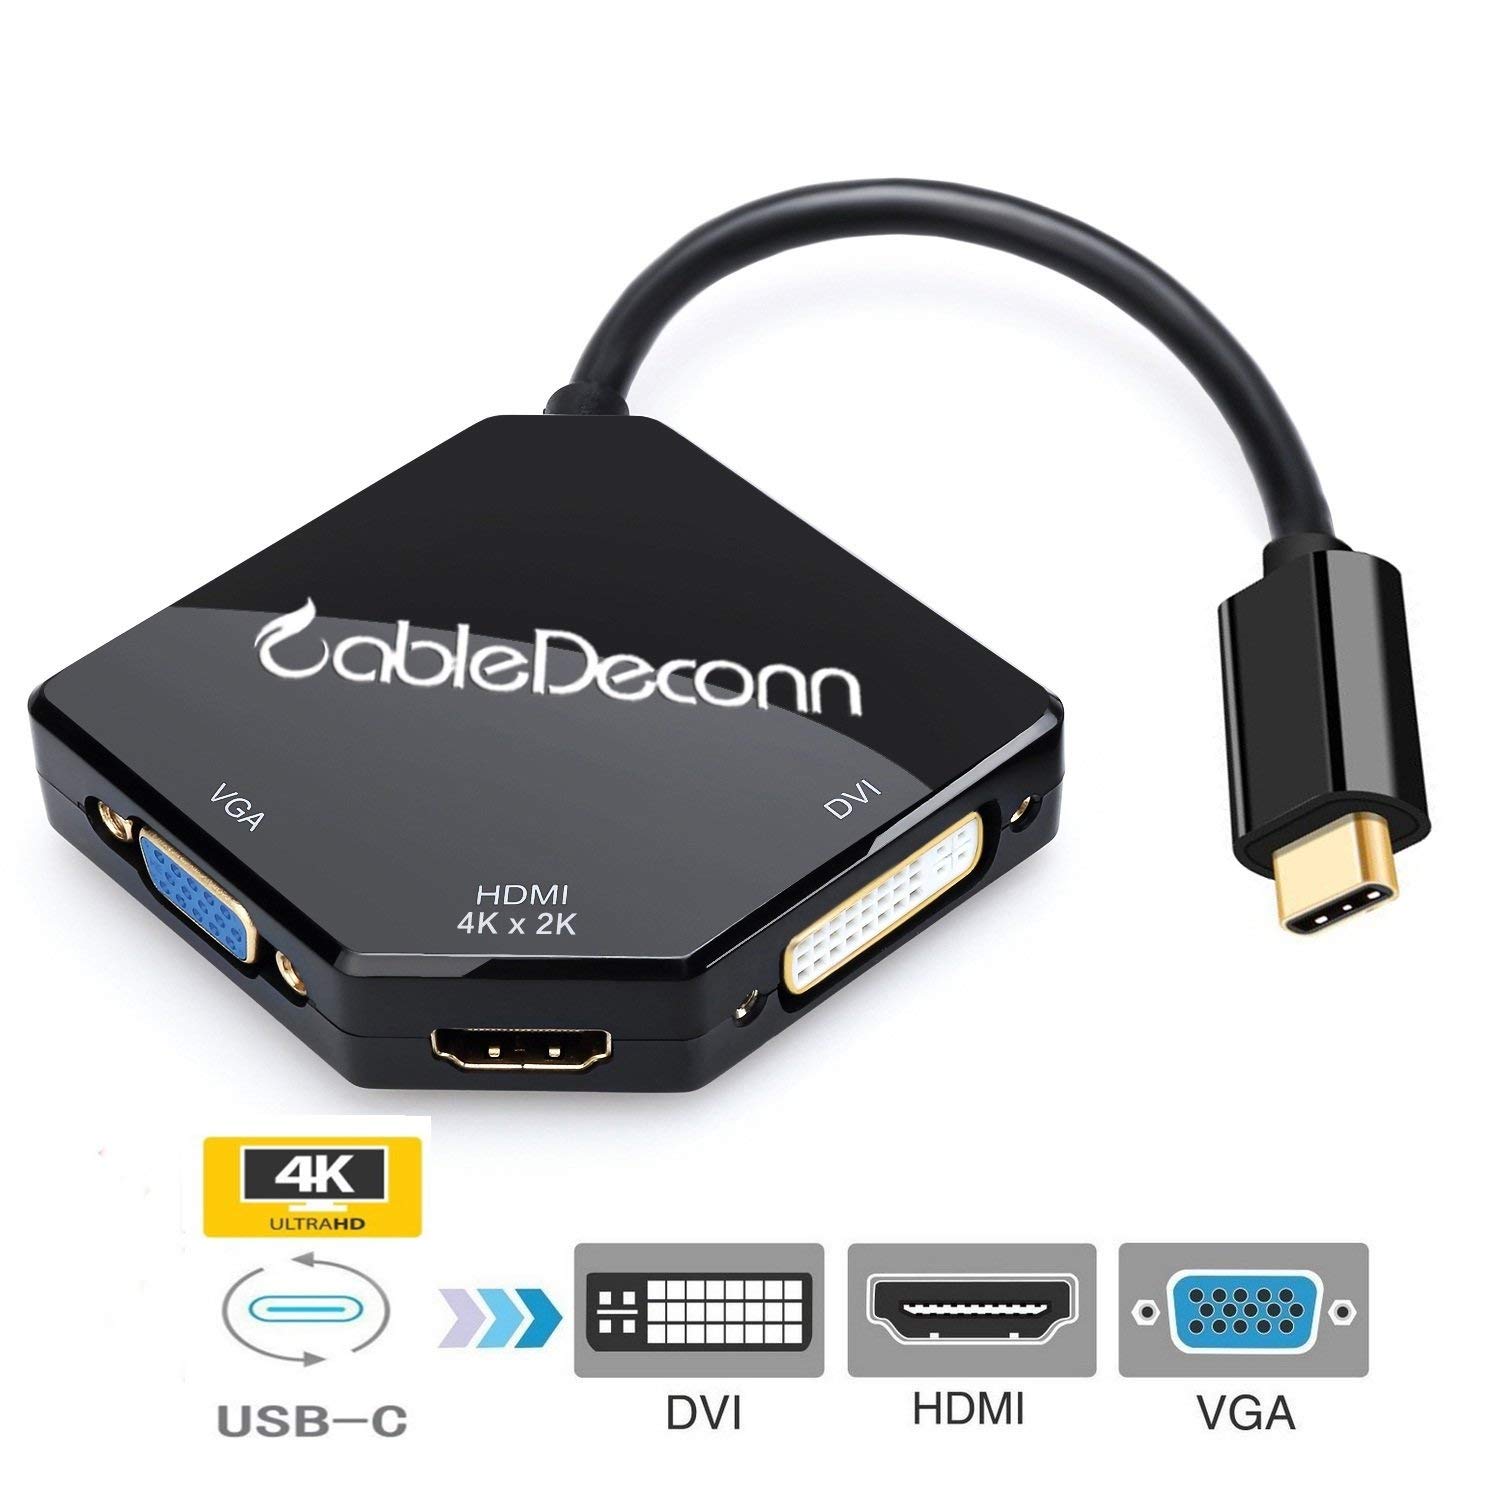 USB-C to VGA Multiport Adapter,CableDeconn Thunderbolt 3 Type-c HDMI 4K 3IN1 Multifunction Cable Converter F0102-USB C Adapter-CableDeconn